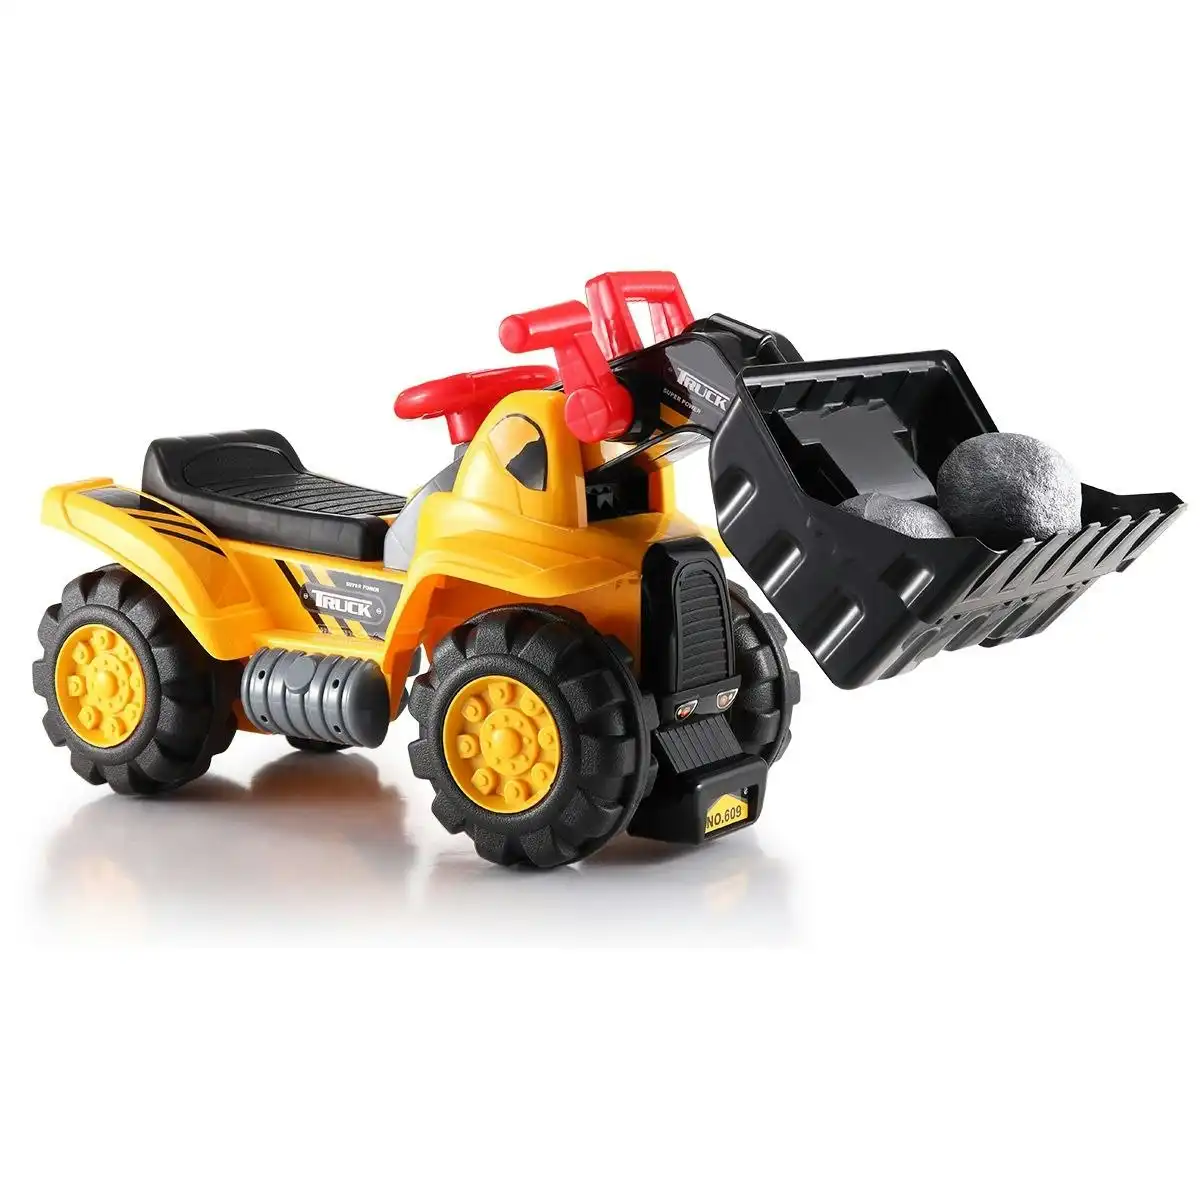 Ausway Toy Tractor for Kids Ride On Excavator